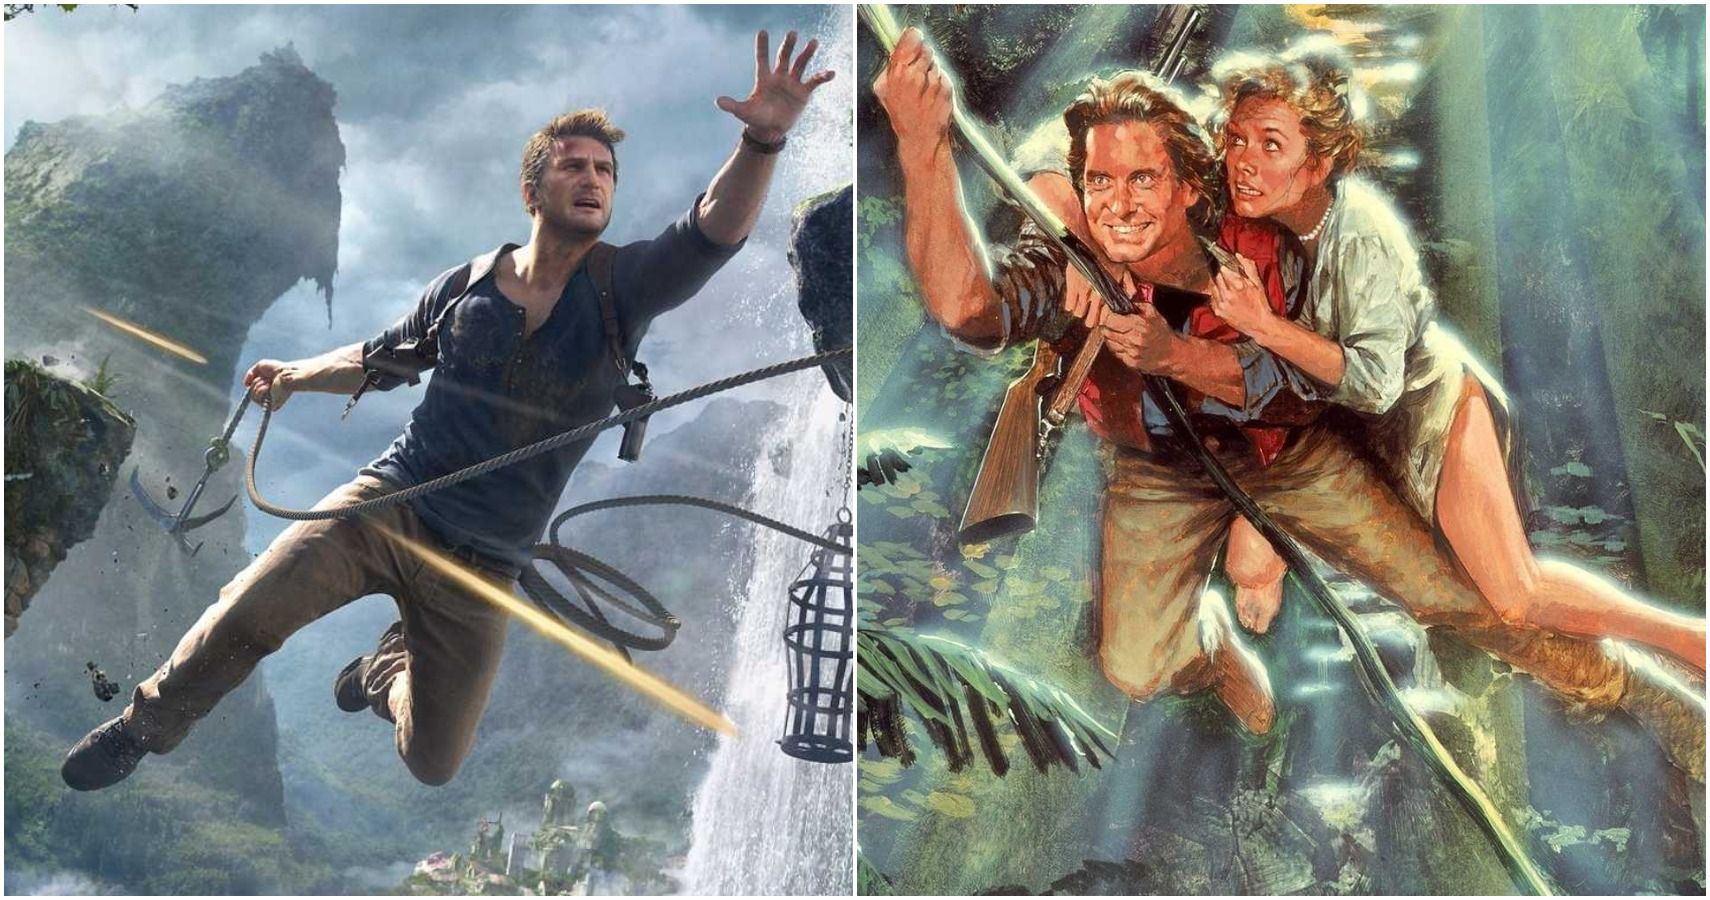 15 Games Like 'Uncharted' When You're Feeling Adventurous // ONE37pm